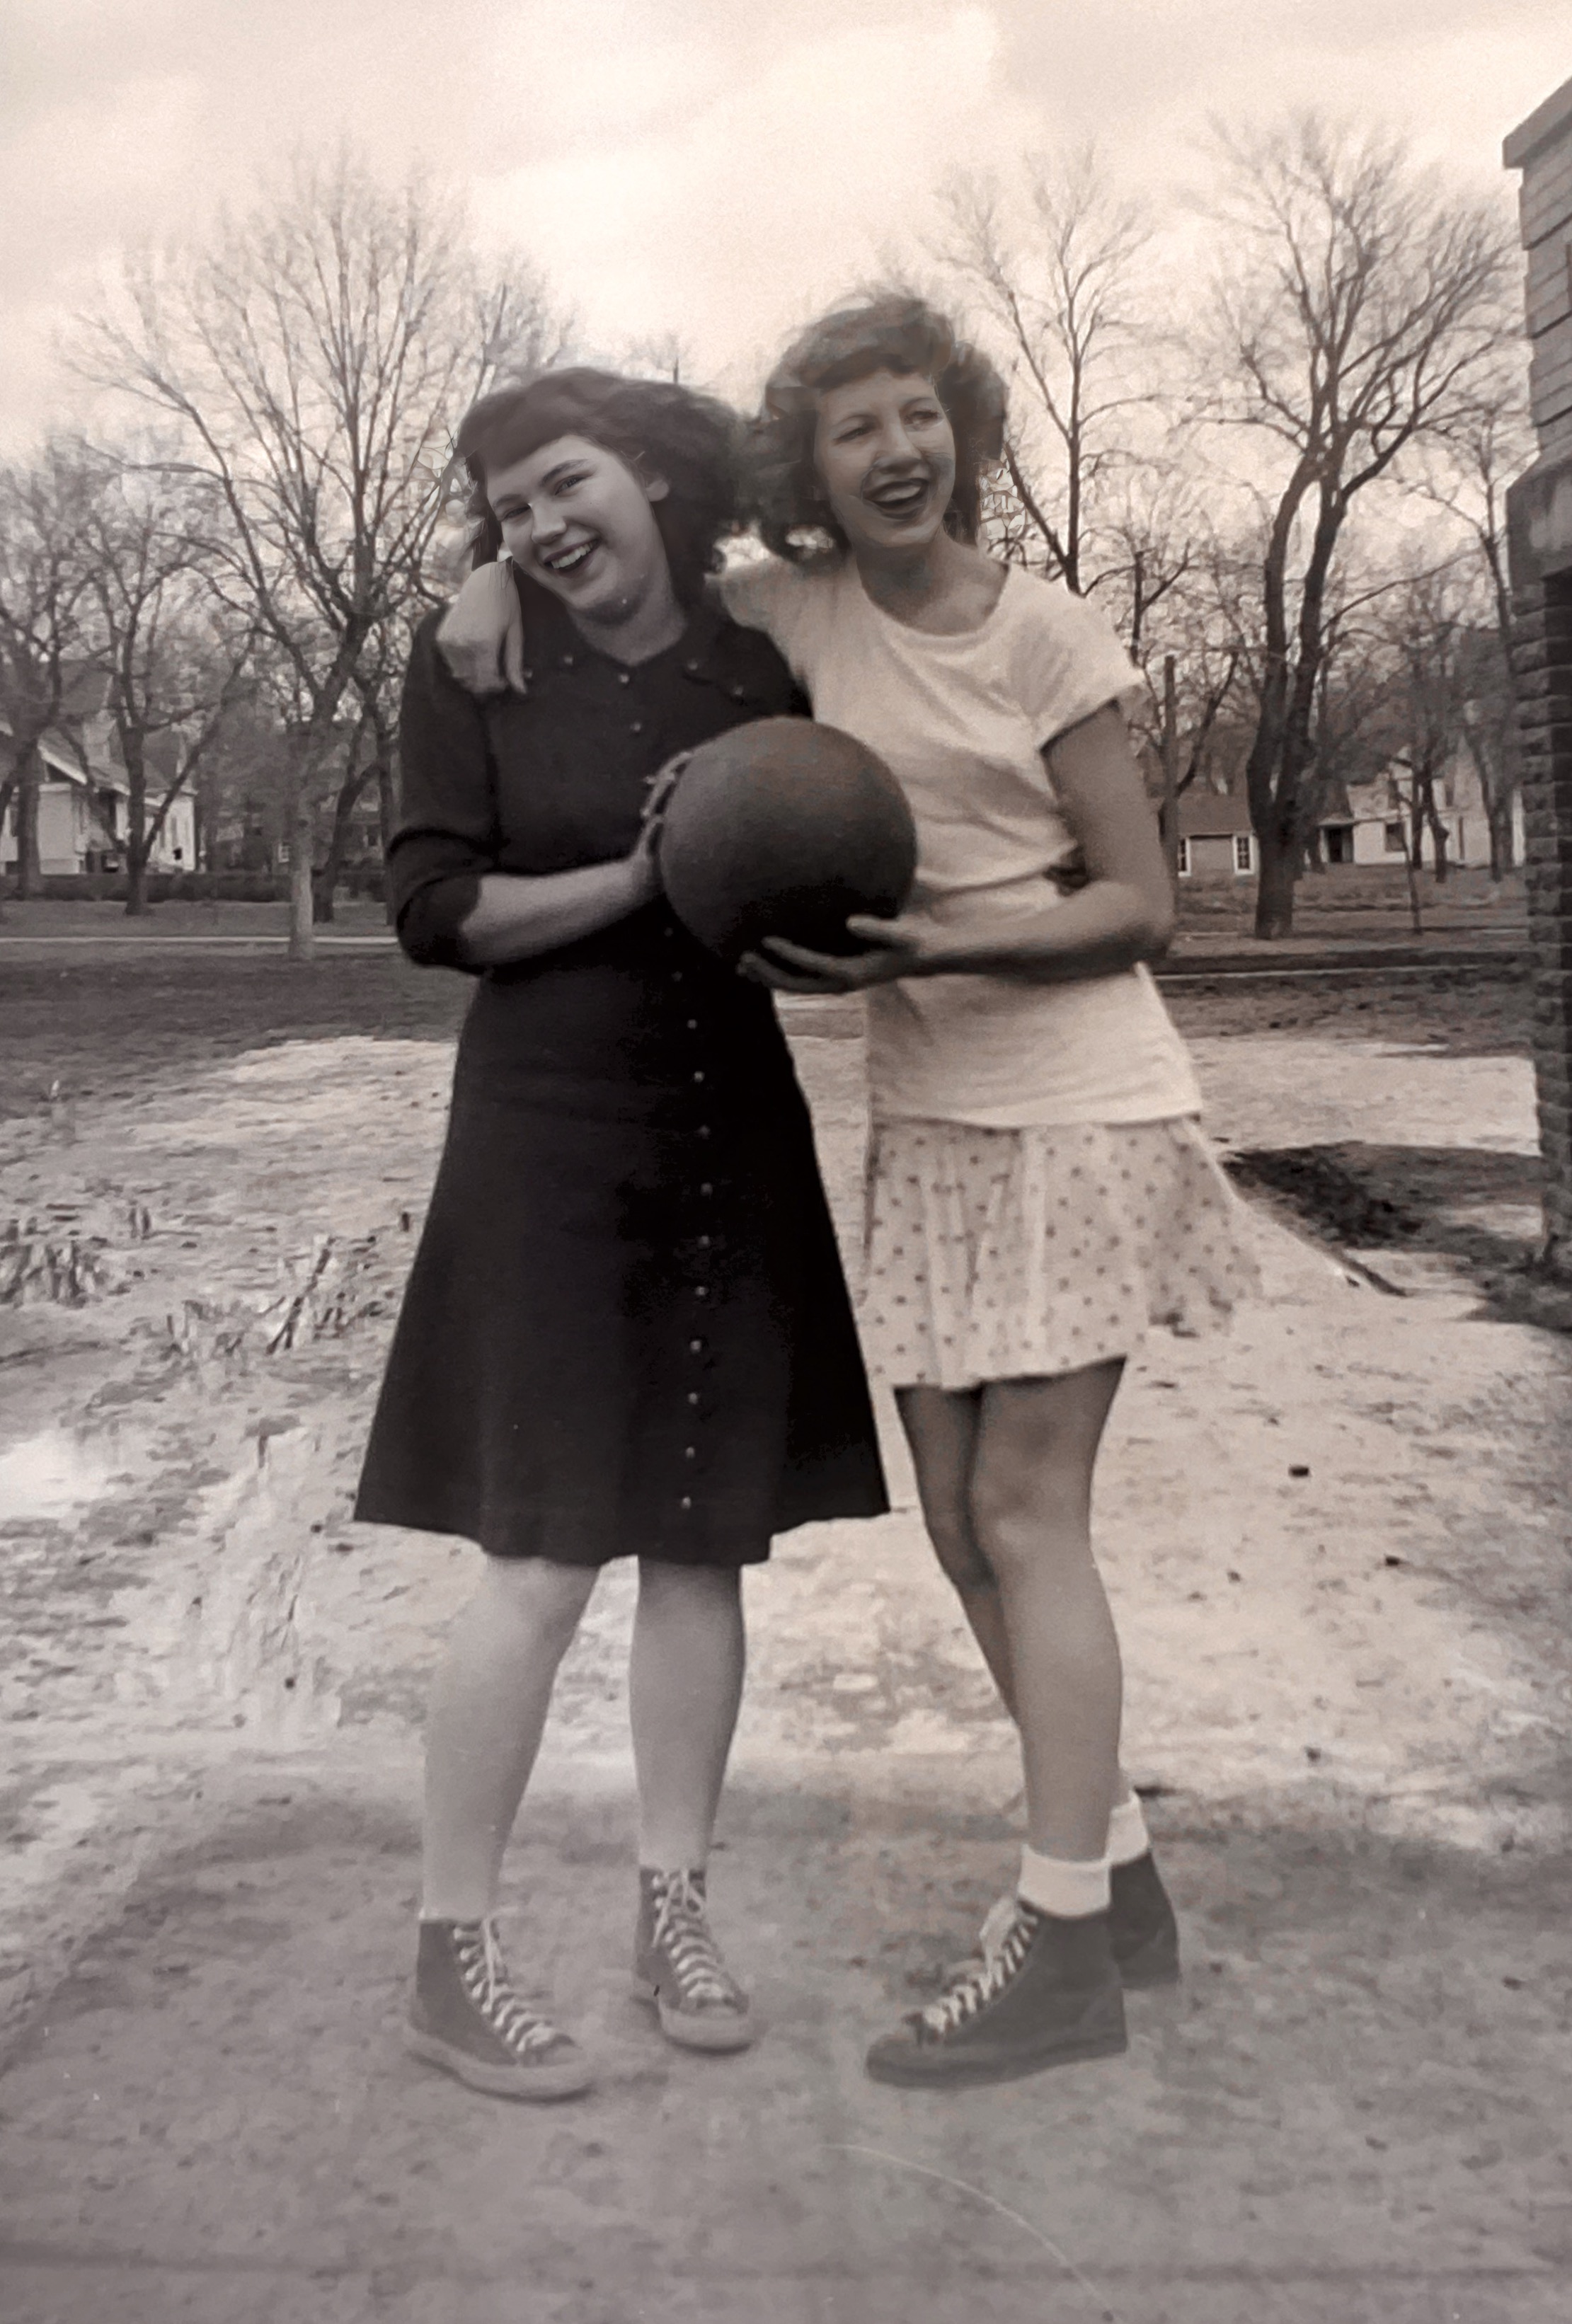 Wilma “Tootie” Chase and unidentified friend, 1946, Sibley, Iowa.